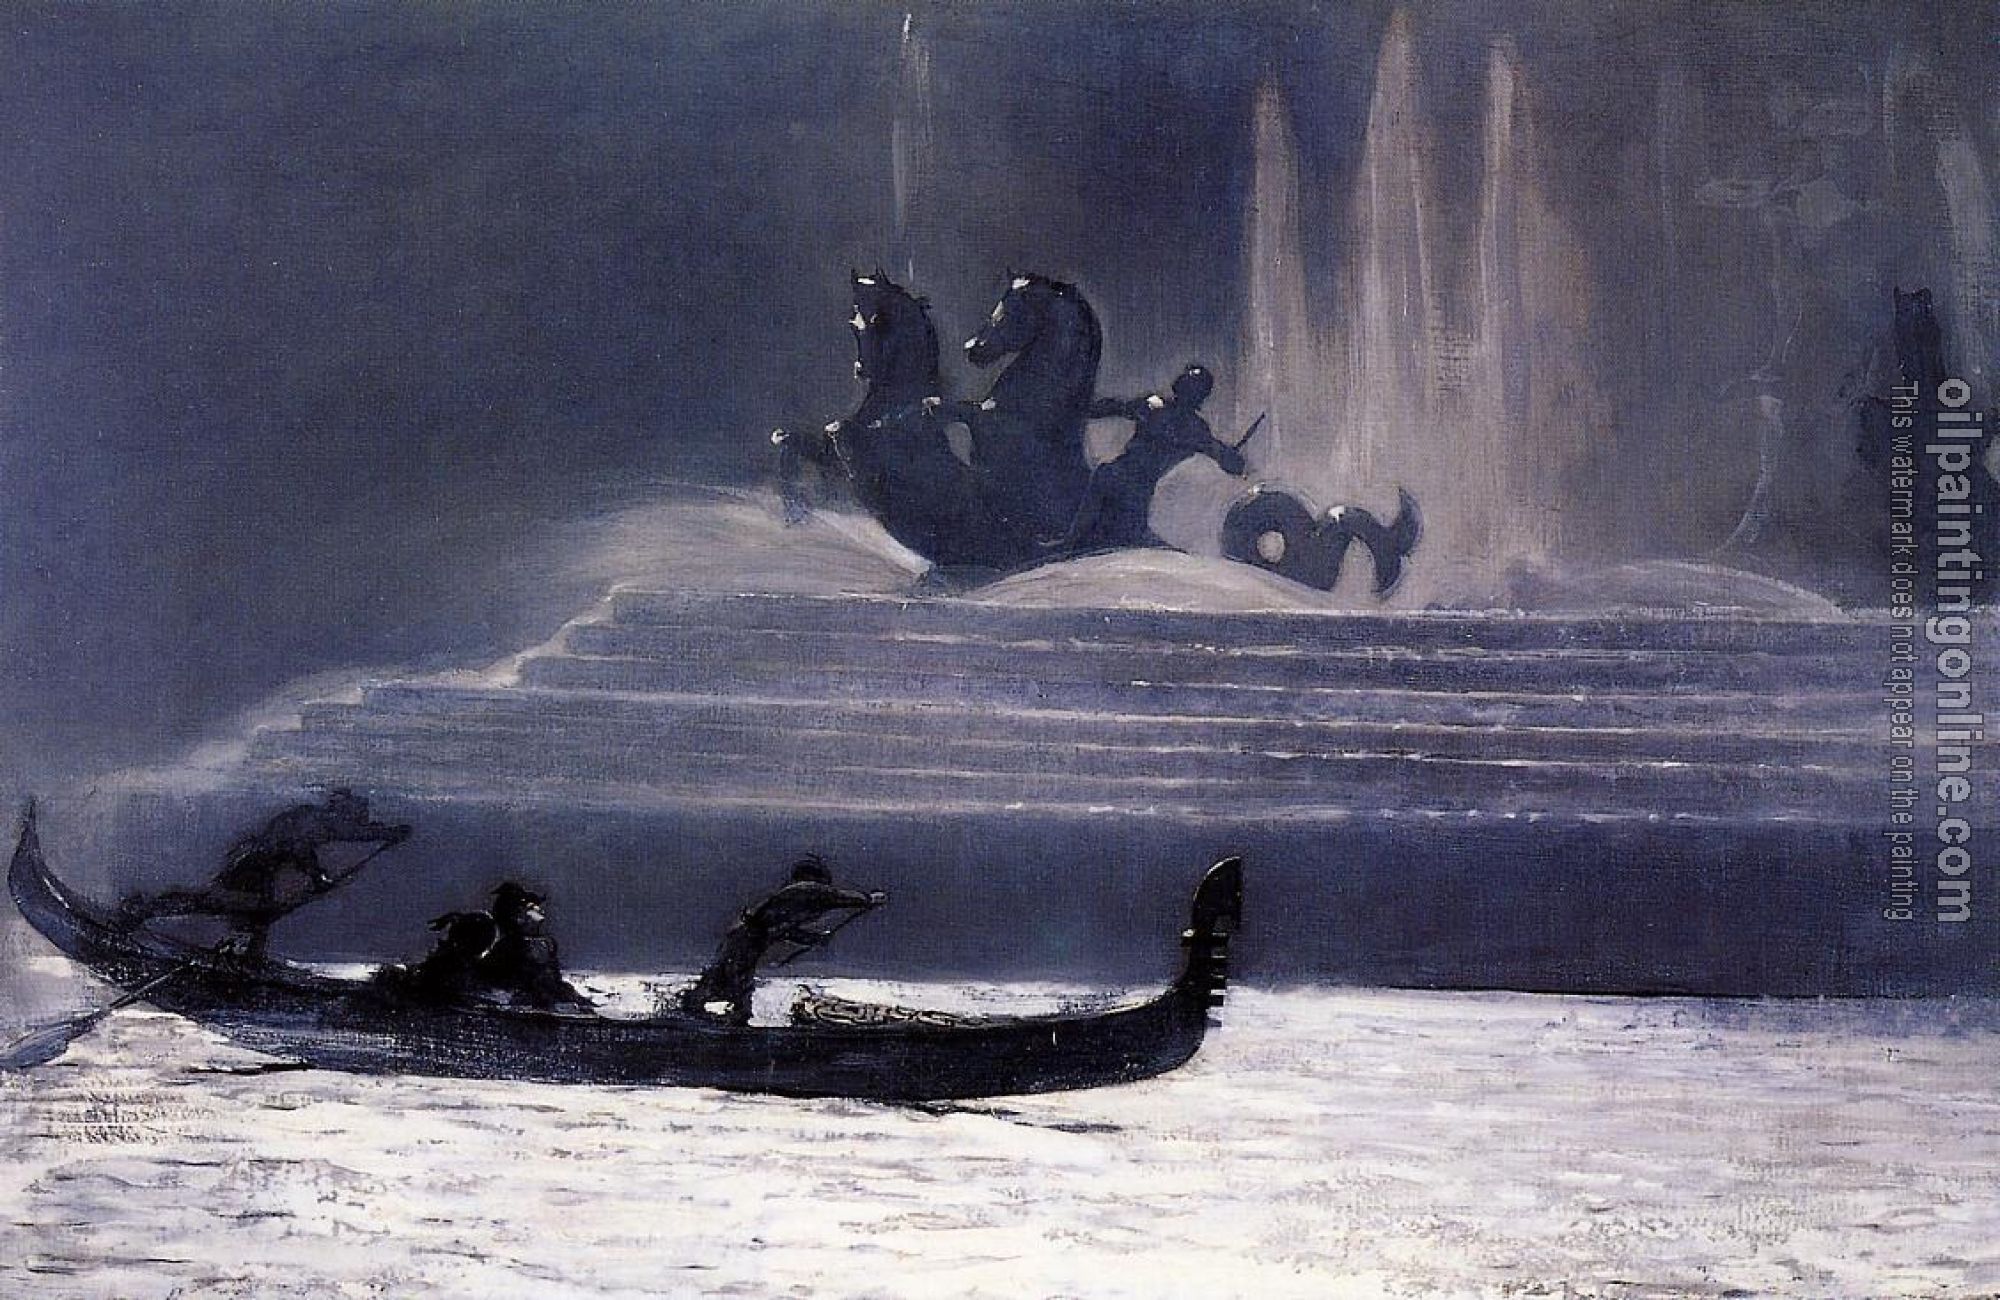 Homer, Winslow - The Fountains at Night, World's Columbian Exposition